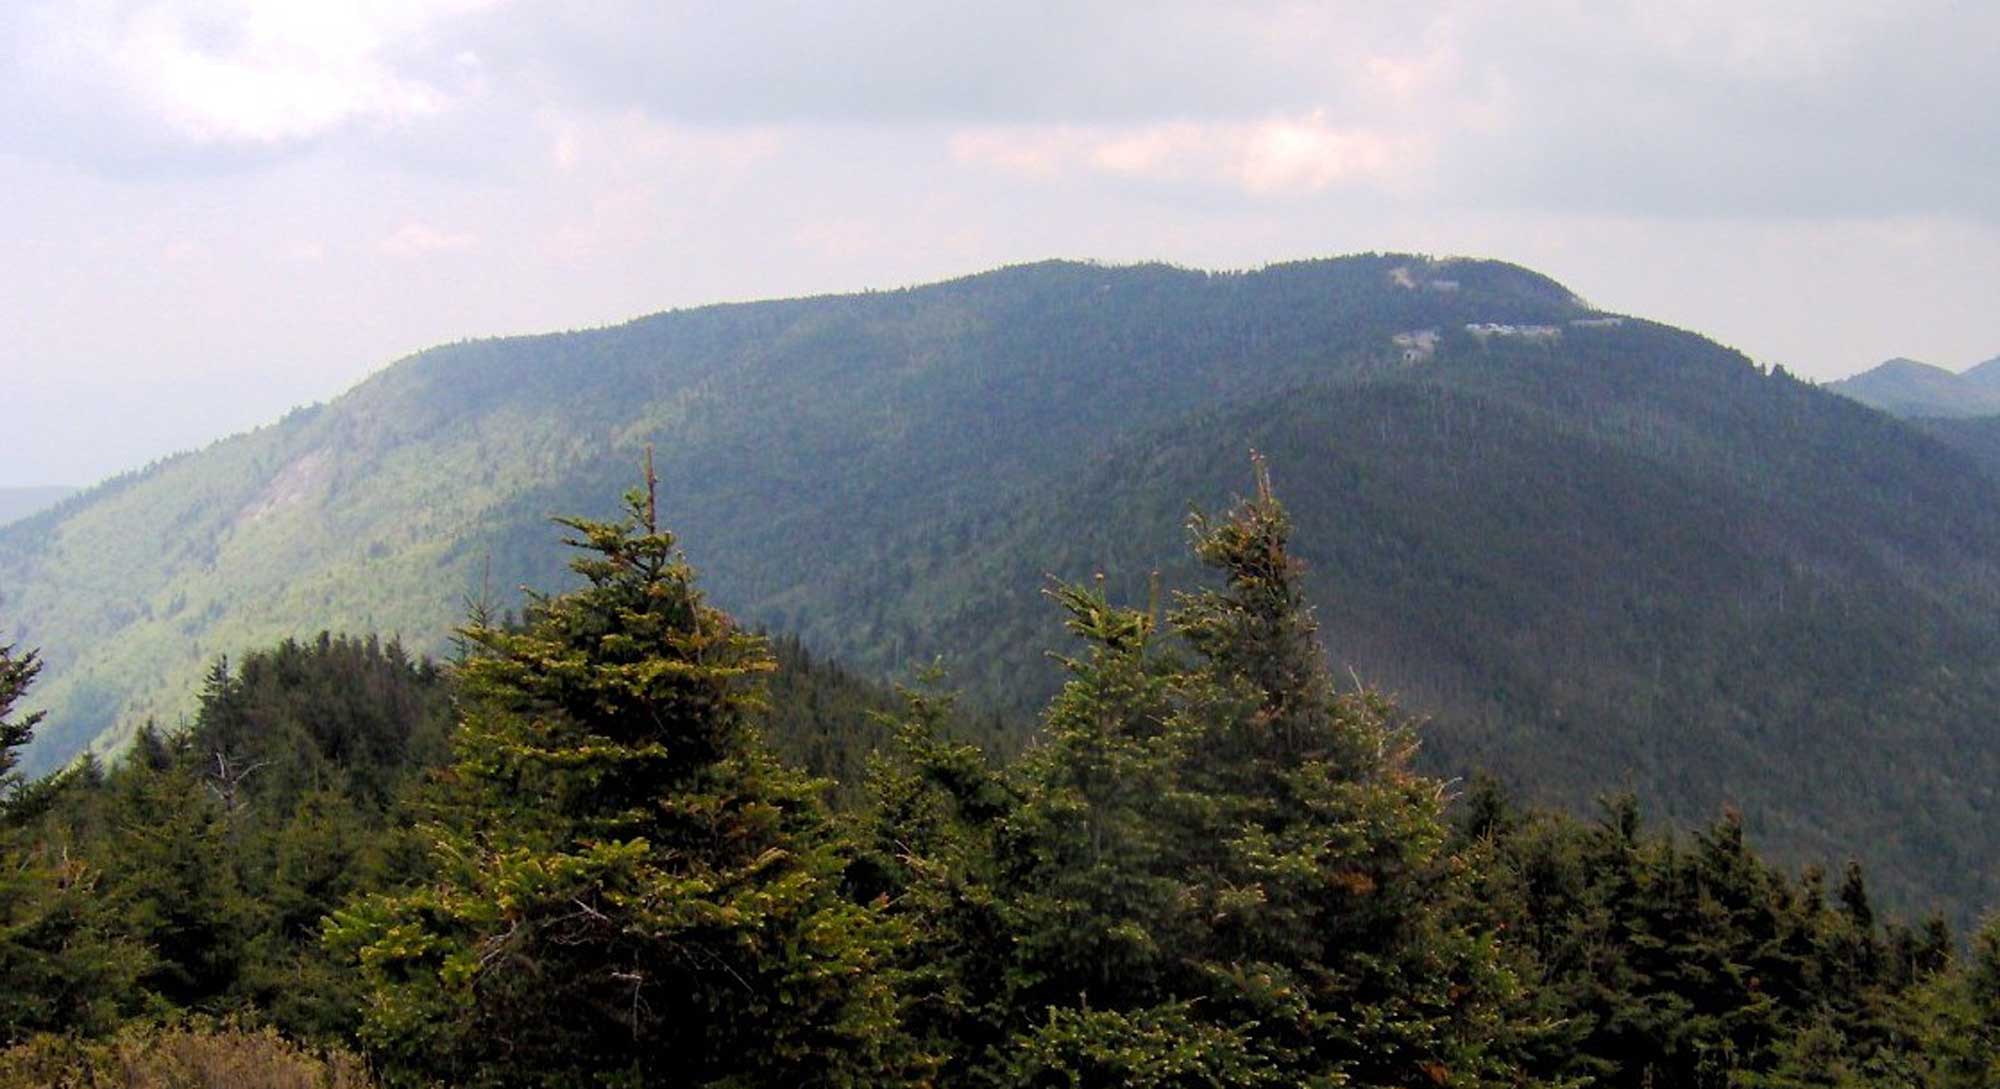 Photograph of Mount Mitchell in North Carolina.